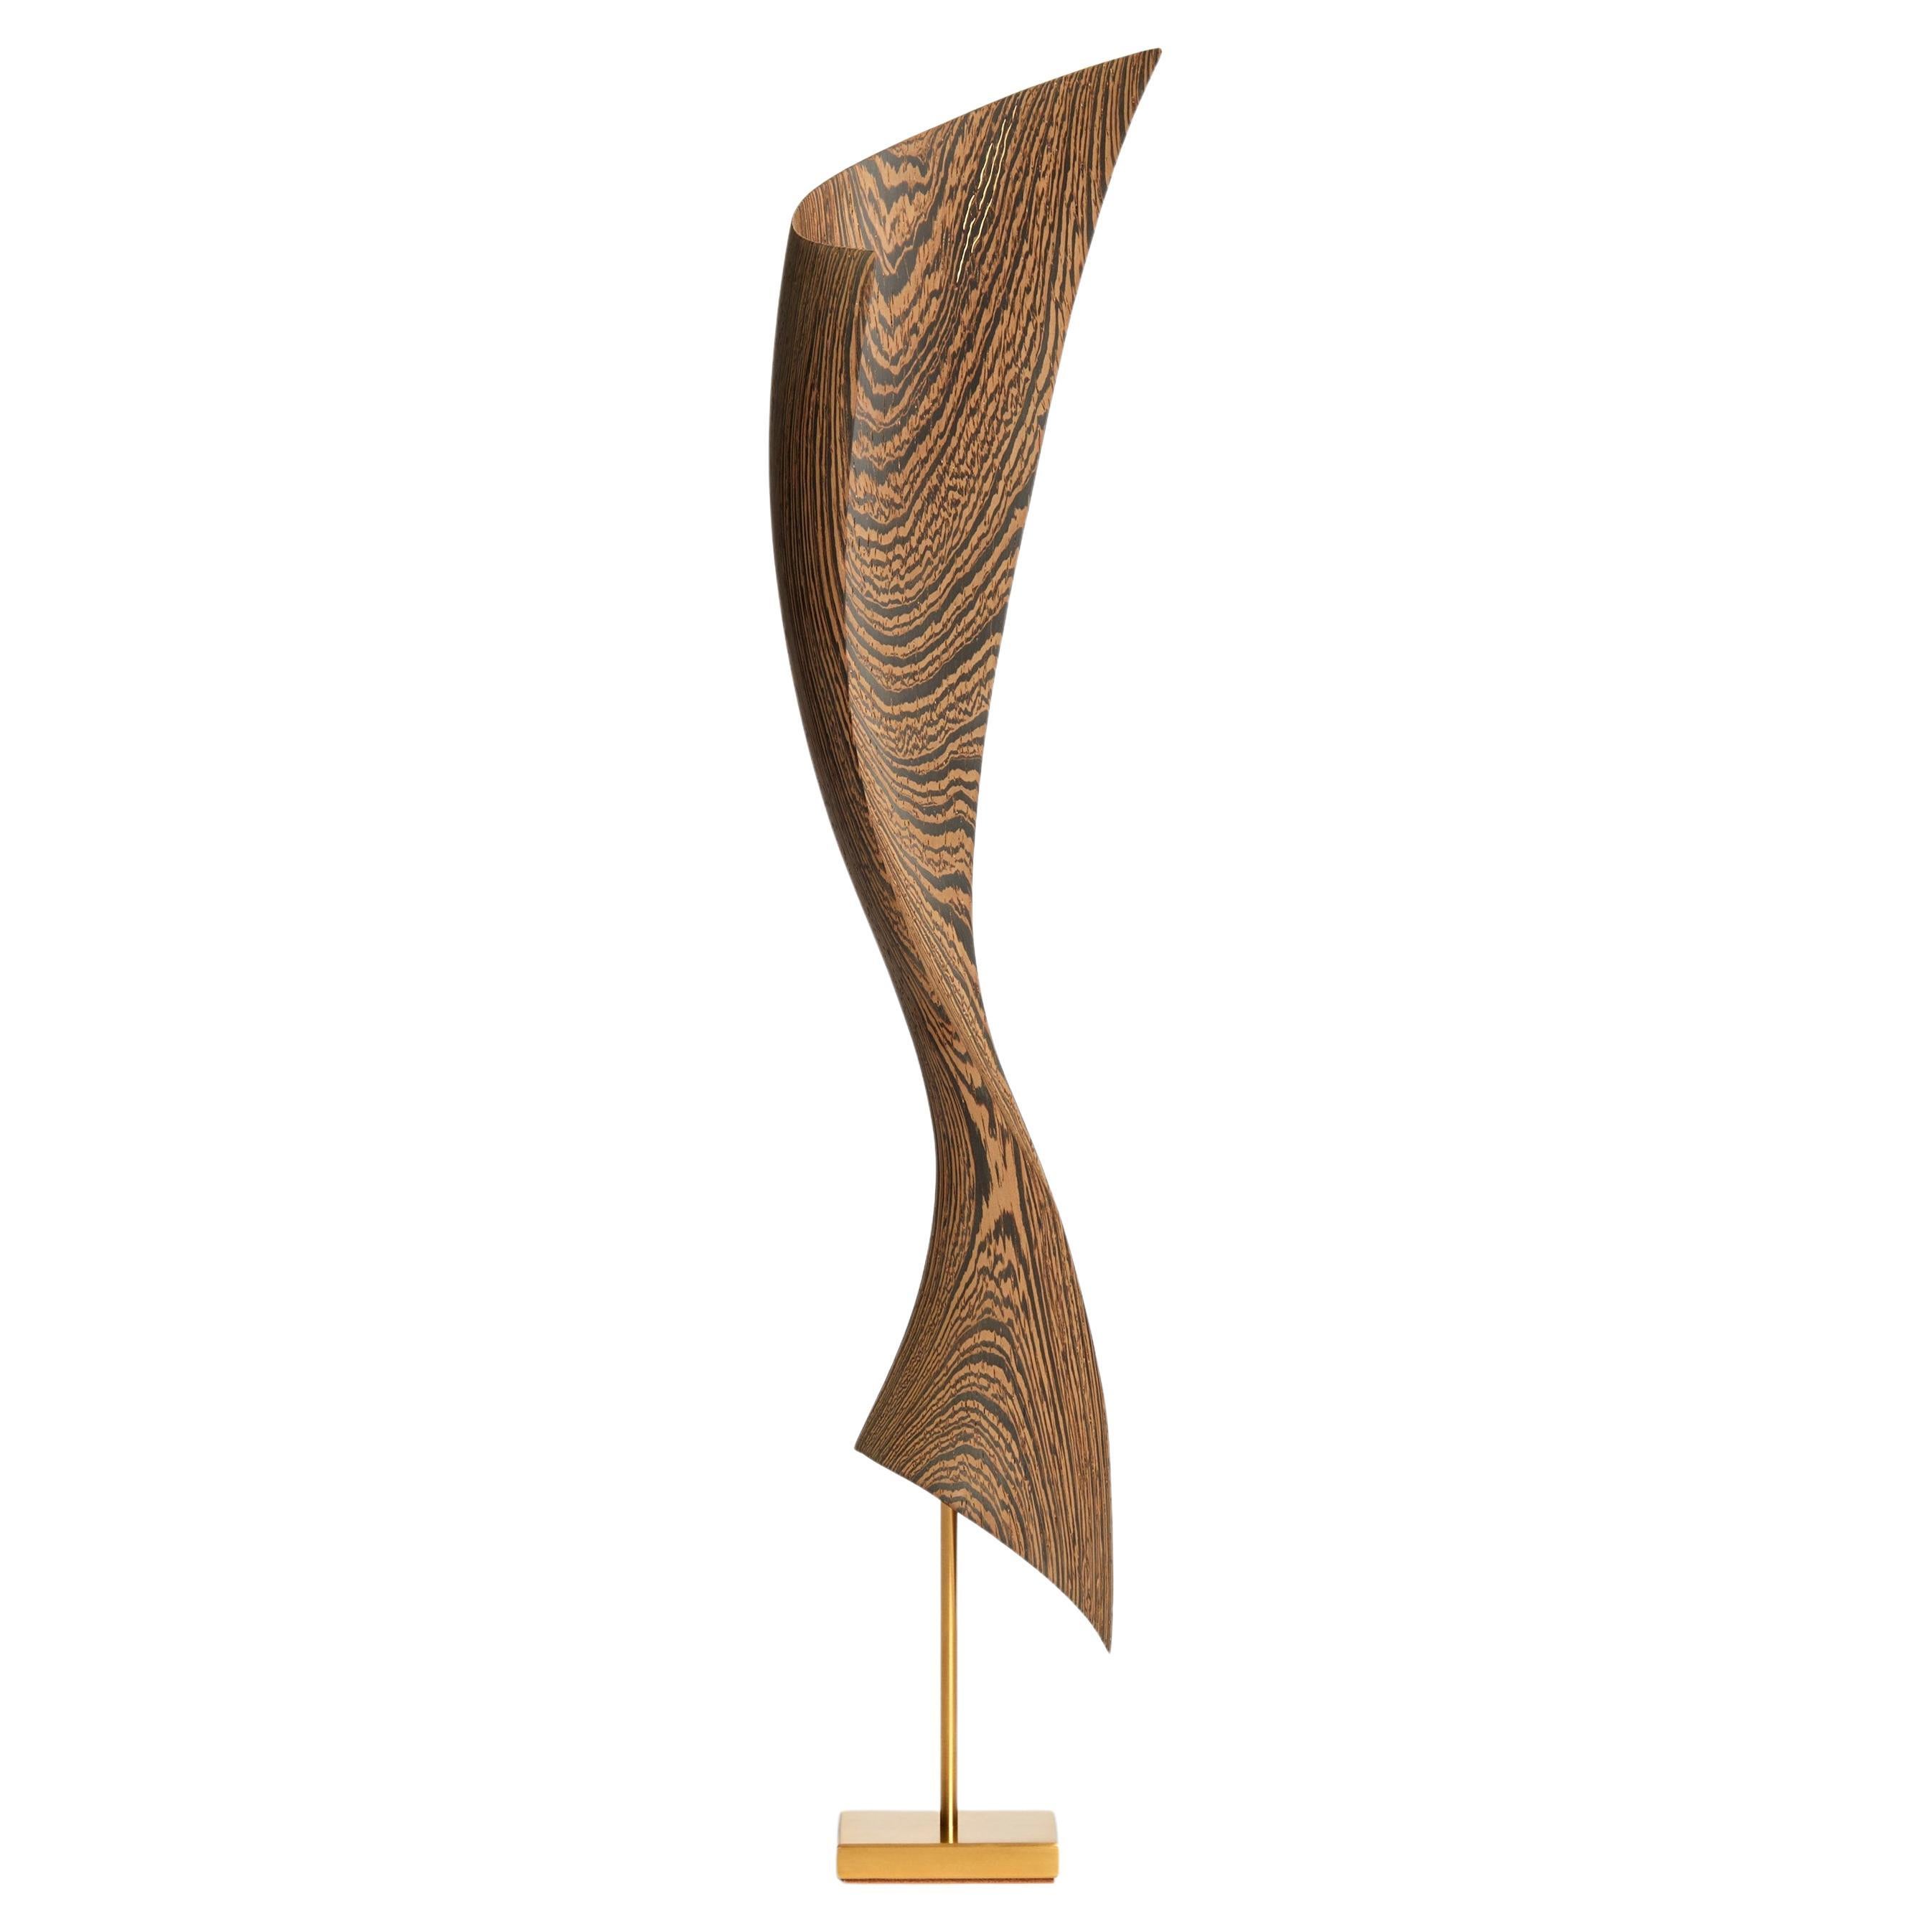 Flow Petit No 7, an Abstract Wood & Gold Sculpture by the Danish Studio Egeværk